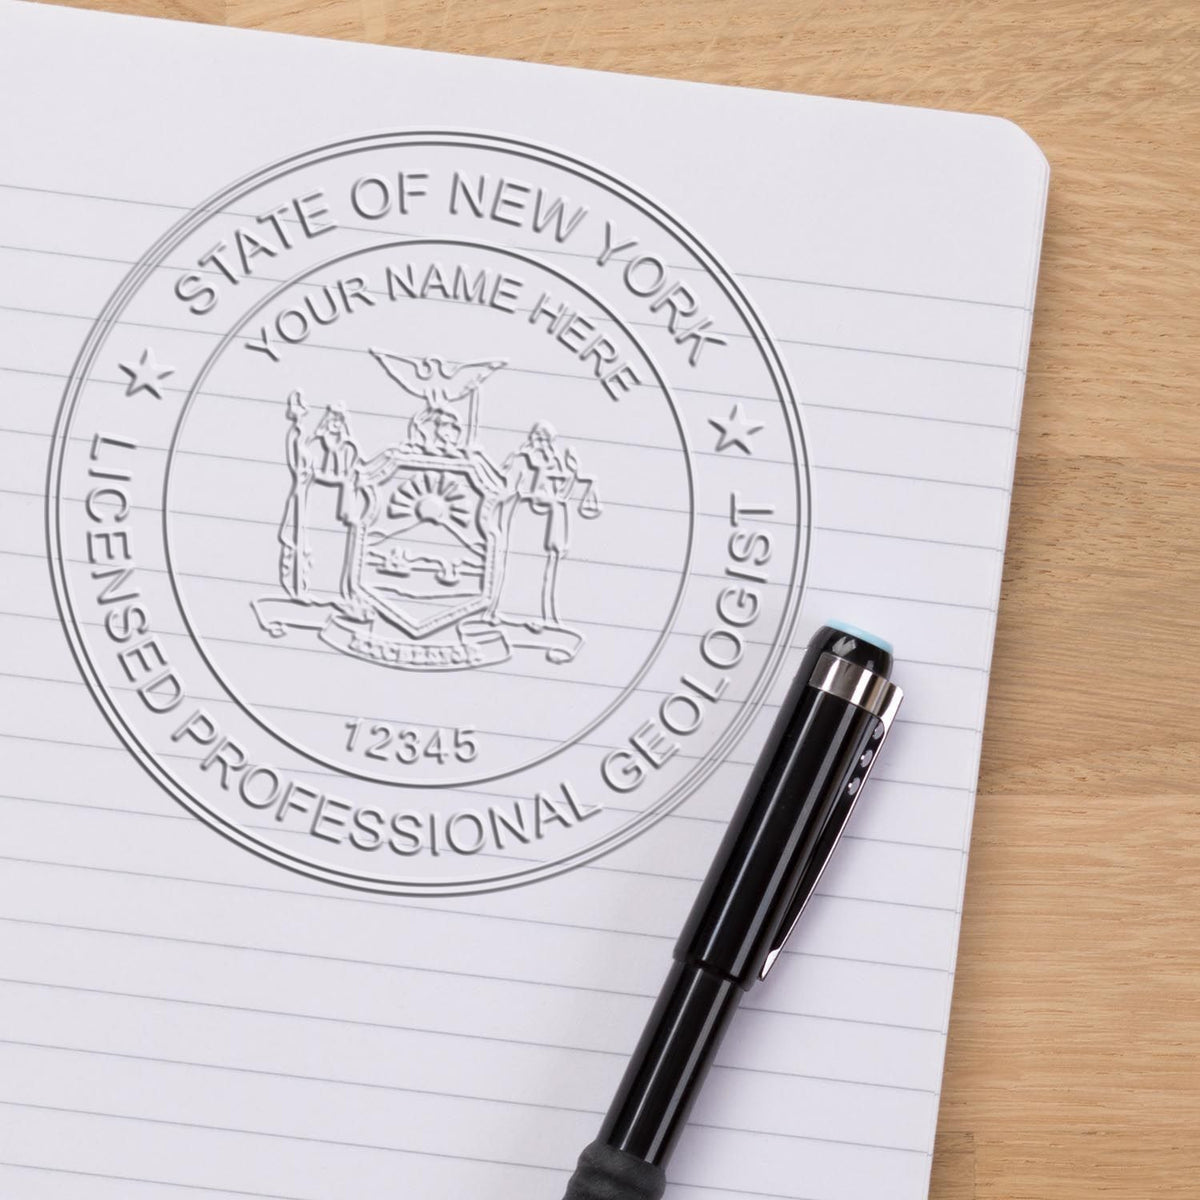 This paper is stamped with a sample imprint of the Long Reach New York Geology Seal, signifying its quality and reliability.